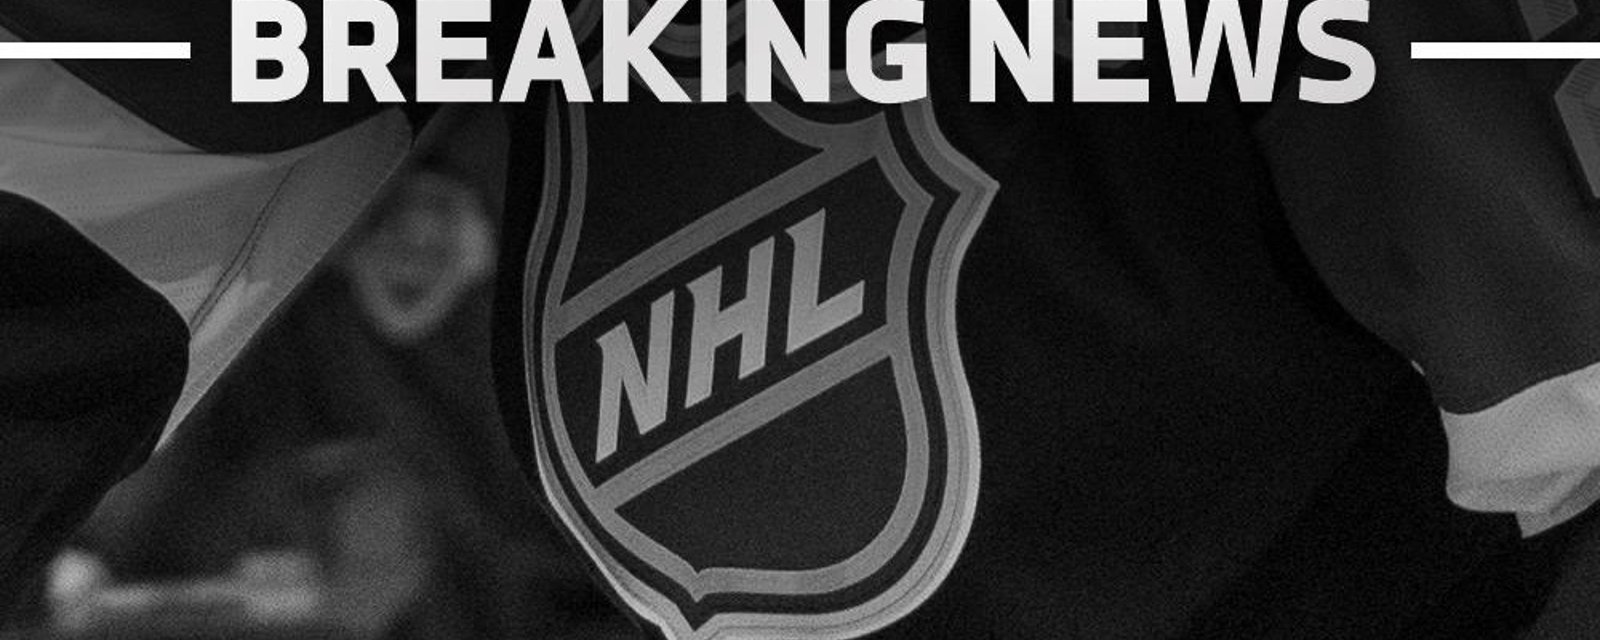 NHL extends the period of self-quarantine for all players 